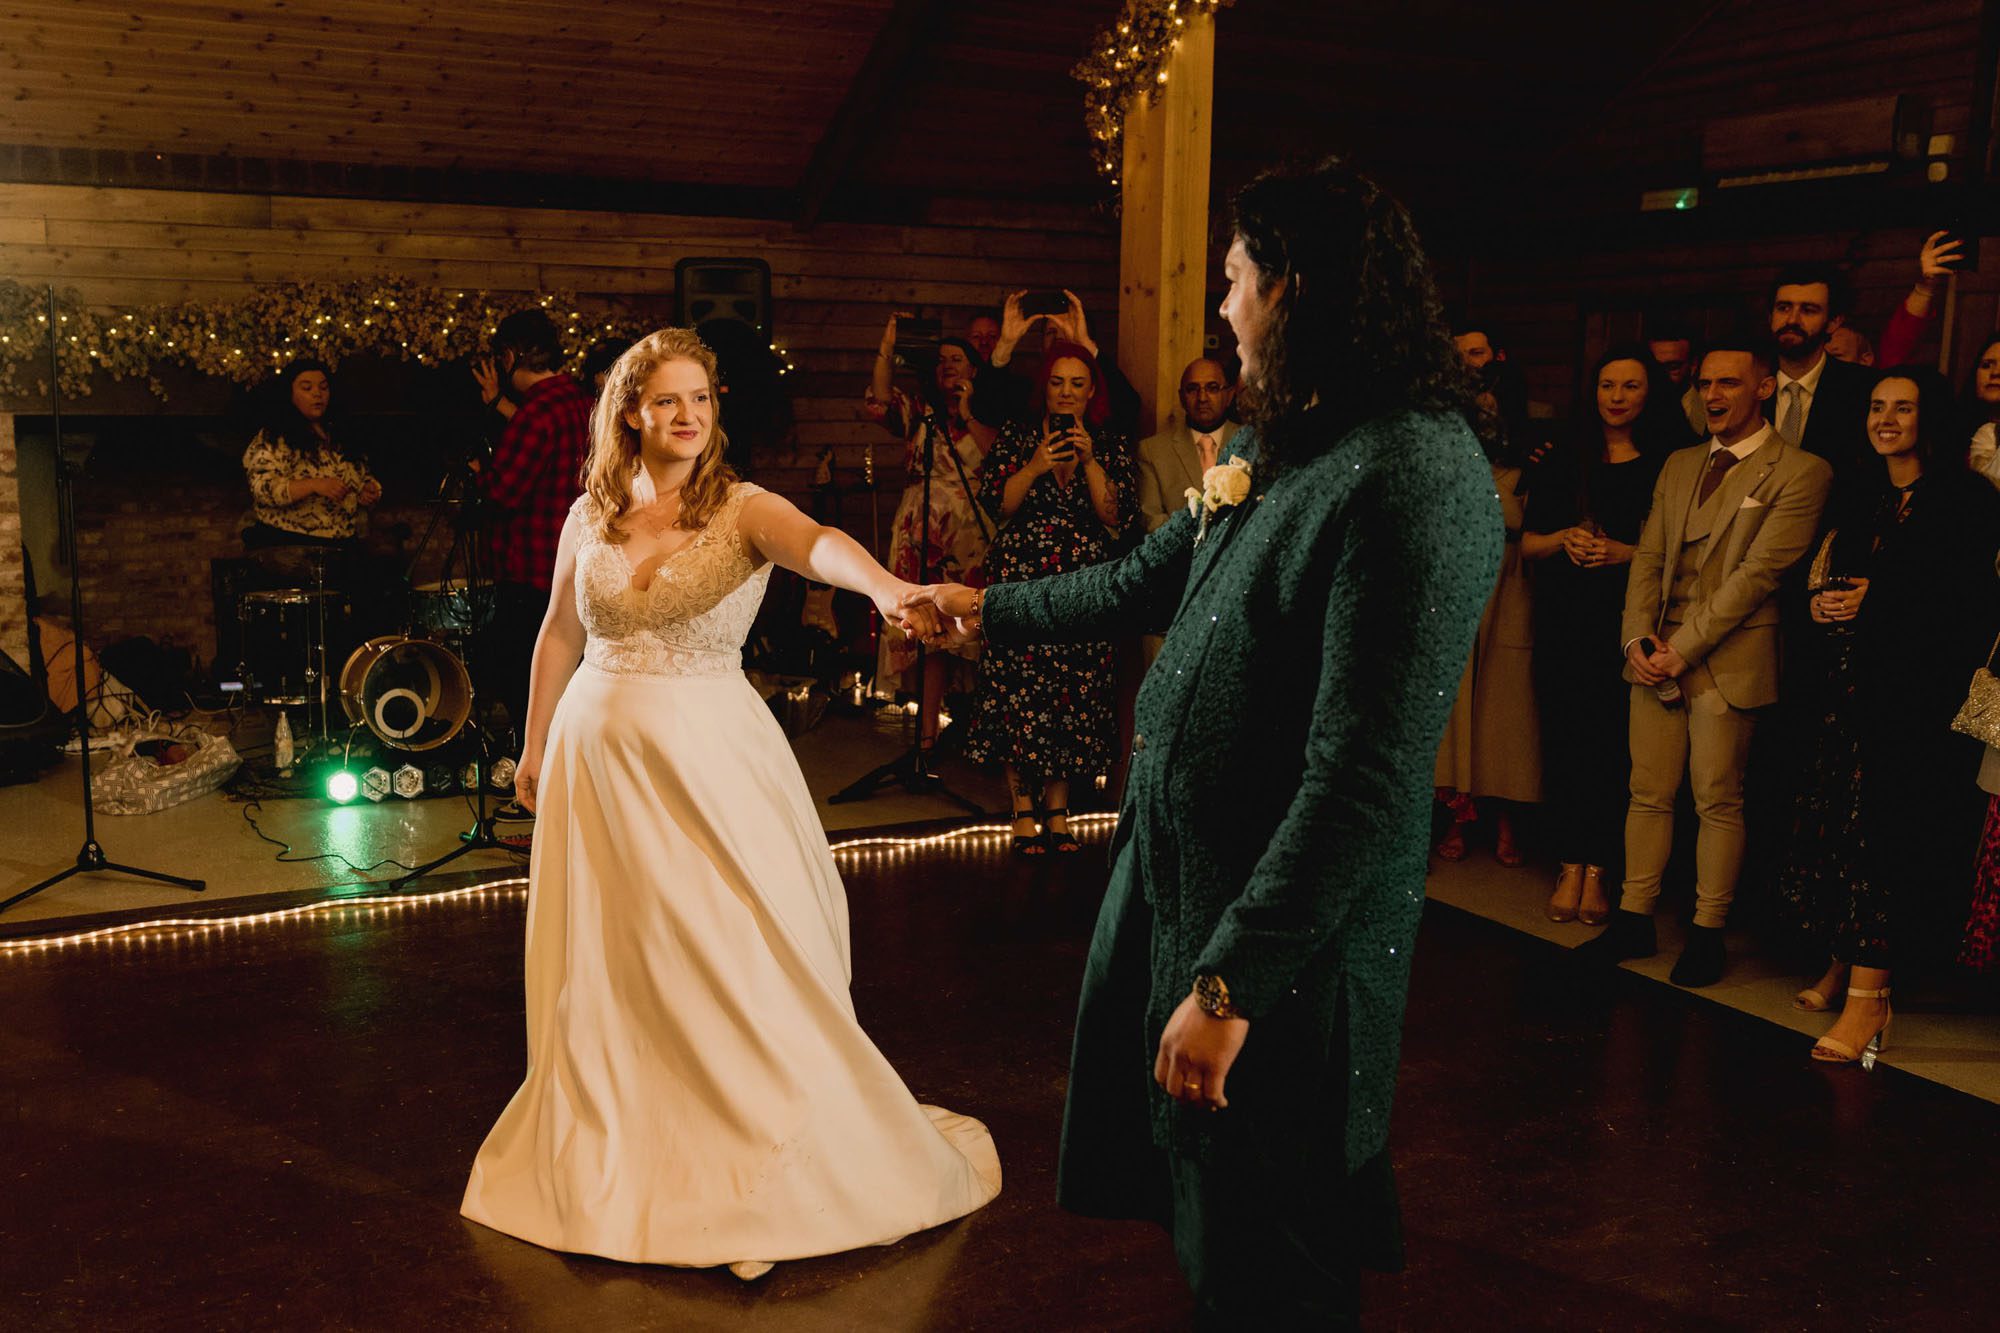 Bride and groom have their first dance together on their wedding day at High Billinghurst Farm.